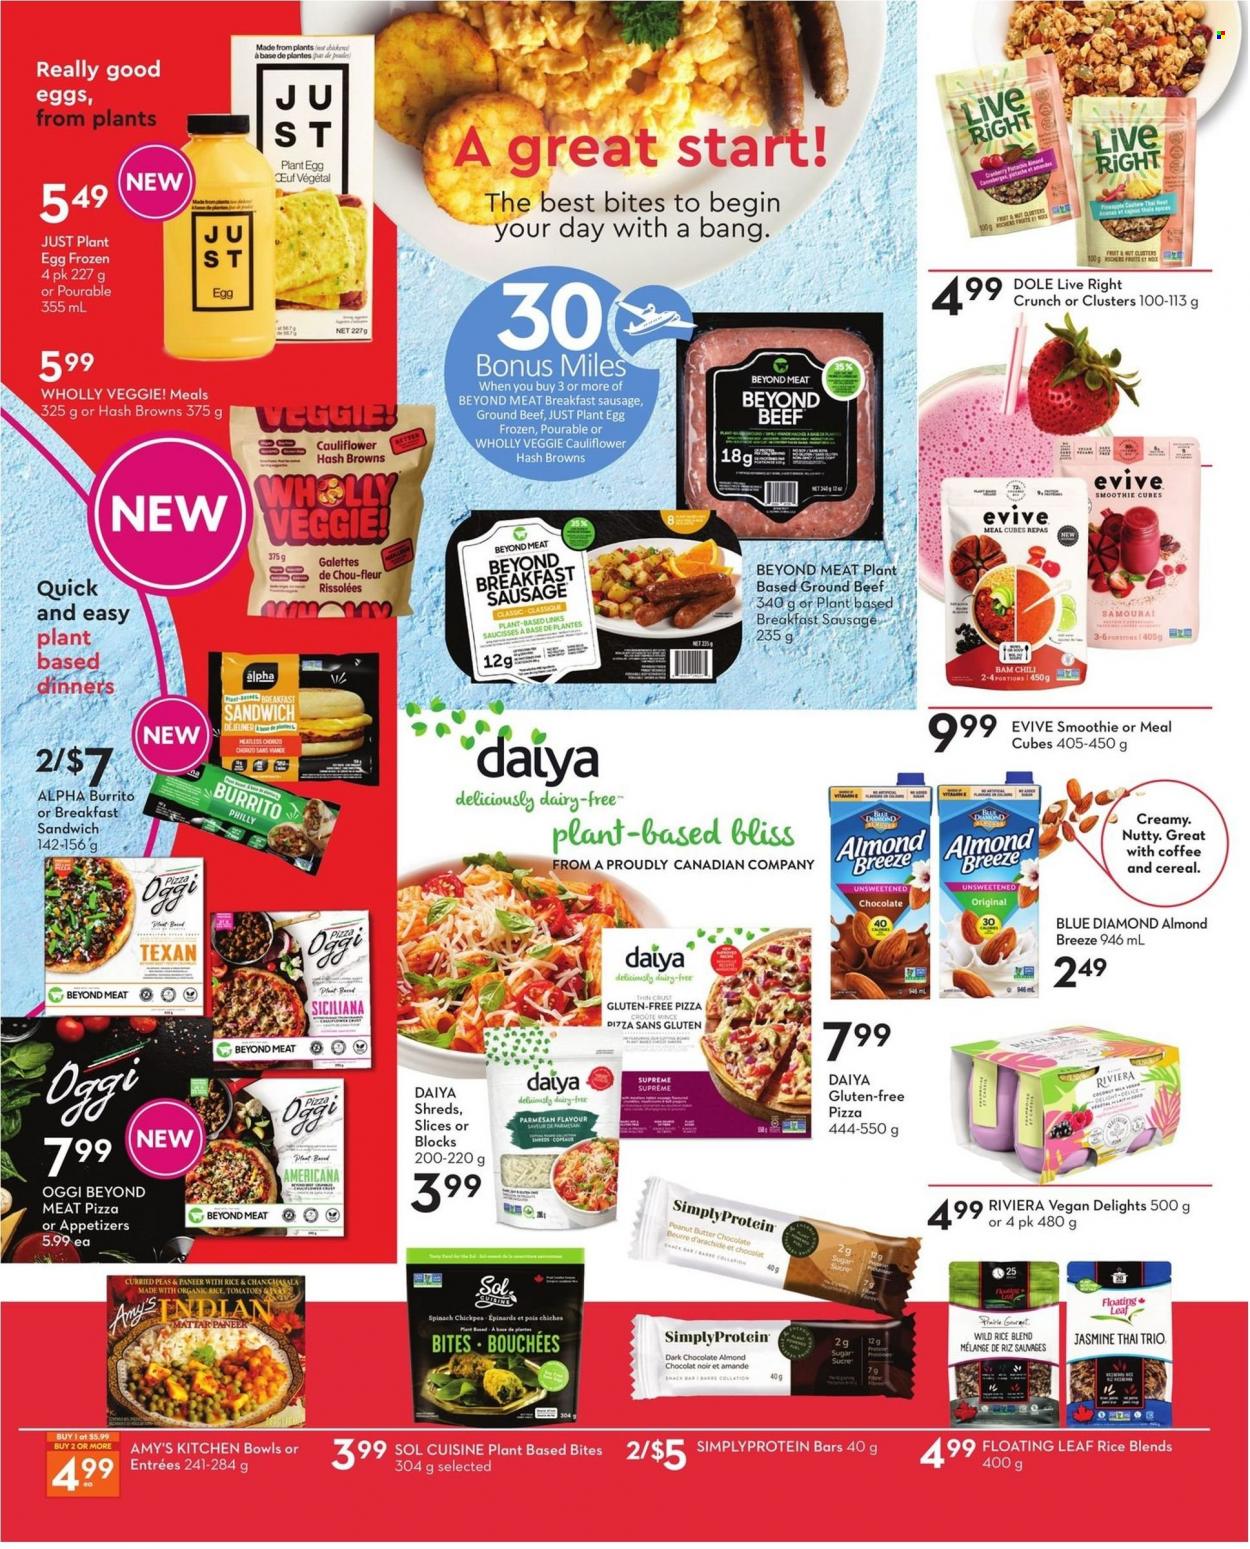 thumbnail - Safeway Flyer - January 20, 2022 - January 26, 2022 - Sales products - Dole, pineapple, coconut, pizza, burrito, sausage, paneer, parmesan, Almond Breeze, eggs, butter, hash browns, chocolate, snack, dark chocolate, cereals, Blue Diamond, smoothie, coffee, Sol, beef meat, ground beef. Page 15.